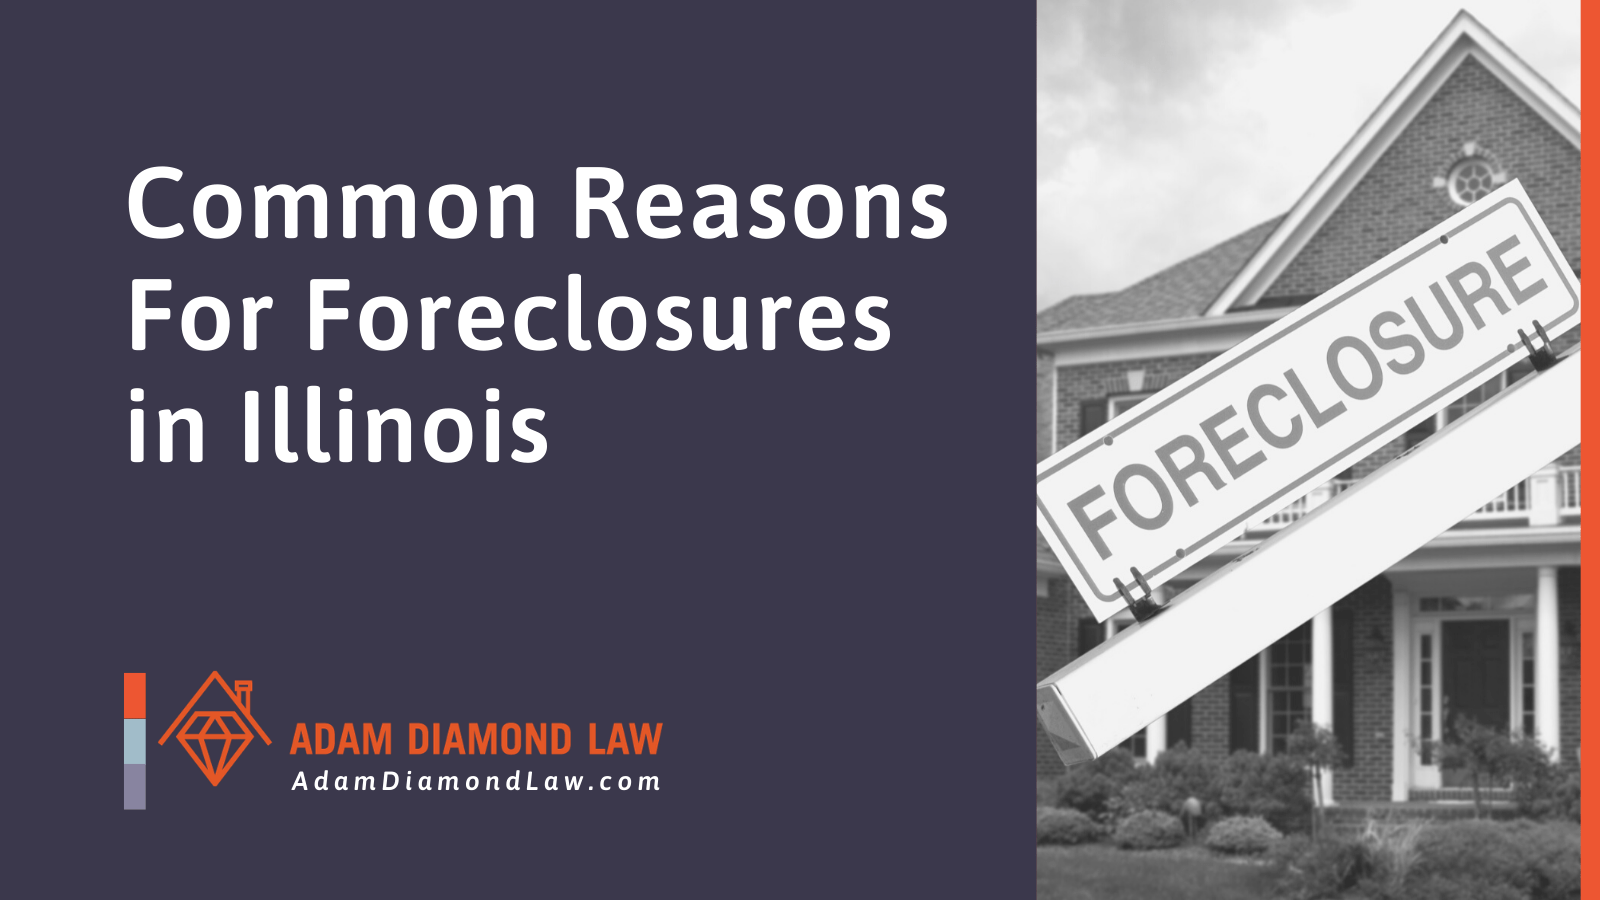 Common Reasons For Foreclosures in Illinois - Adam Diamond Law | McHenry, IL Residential Real Estate Lawyer